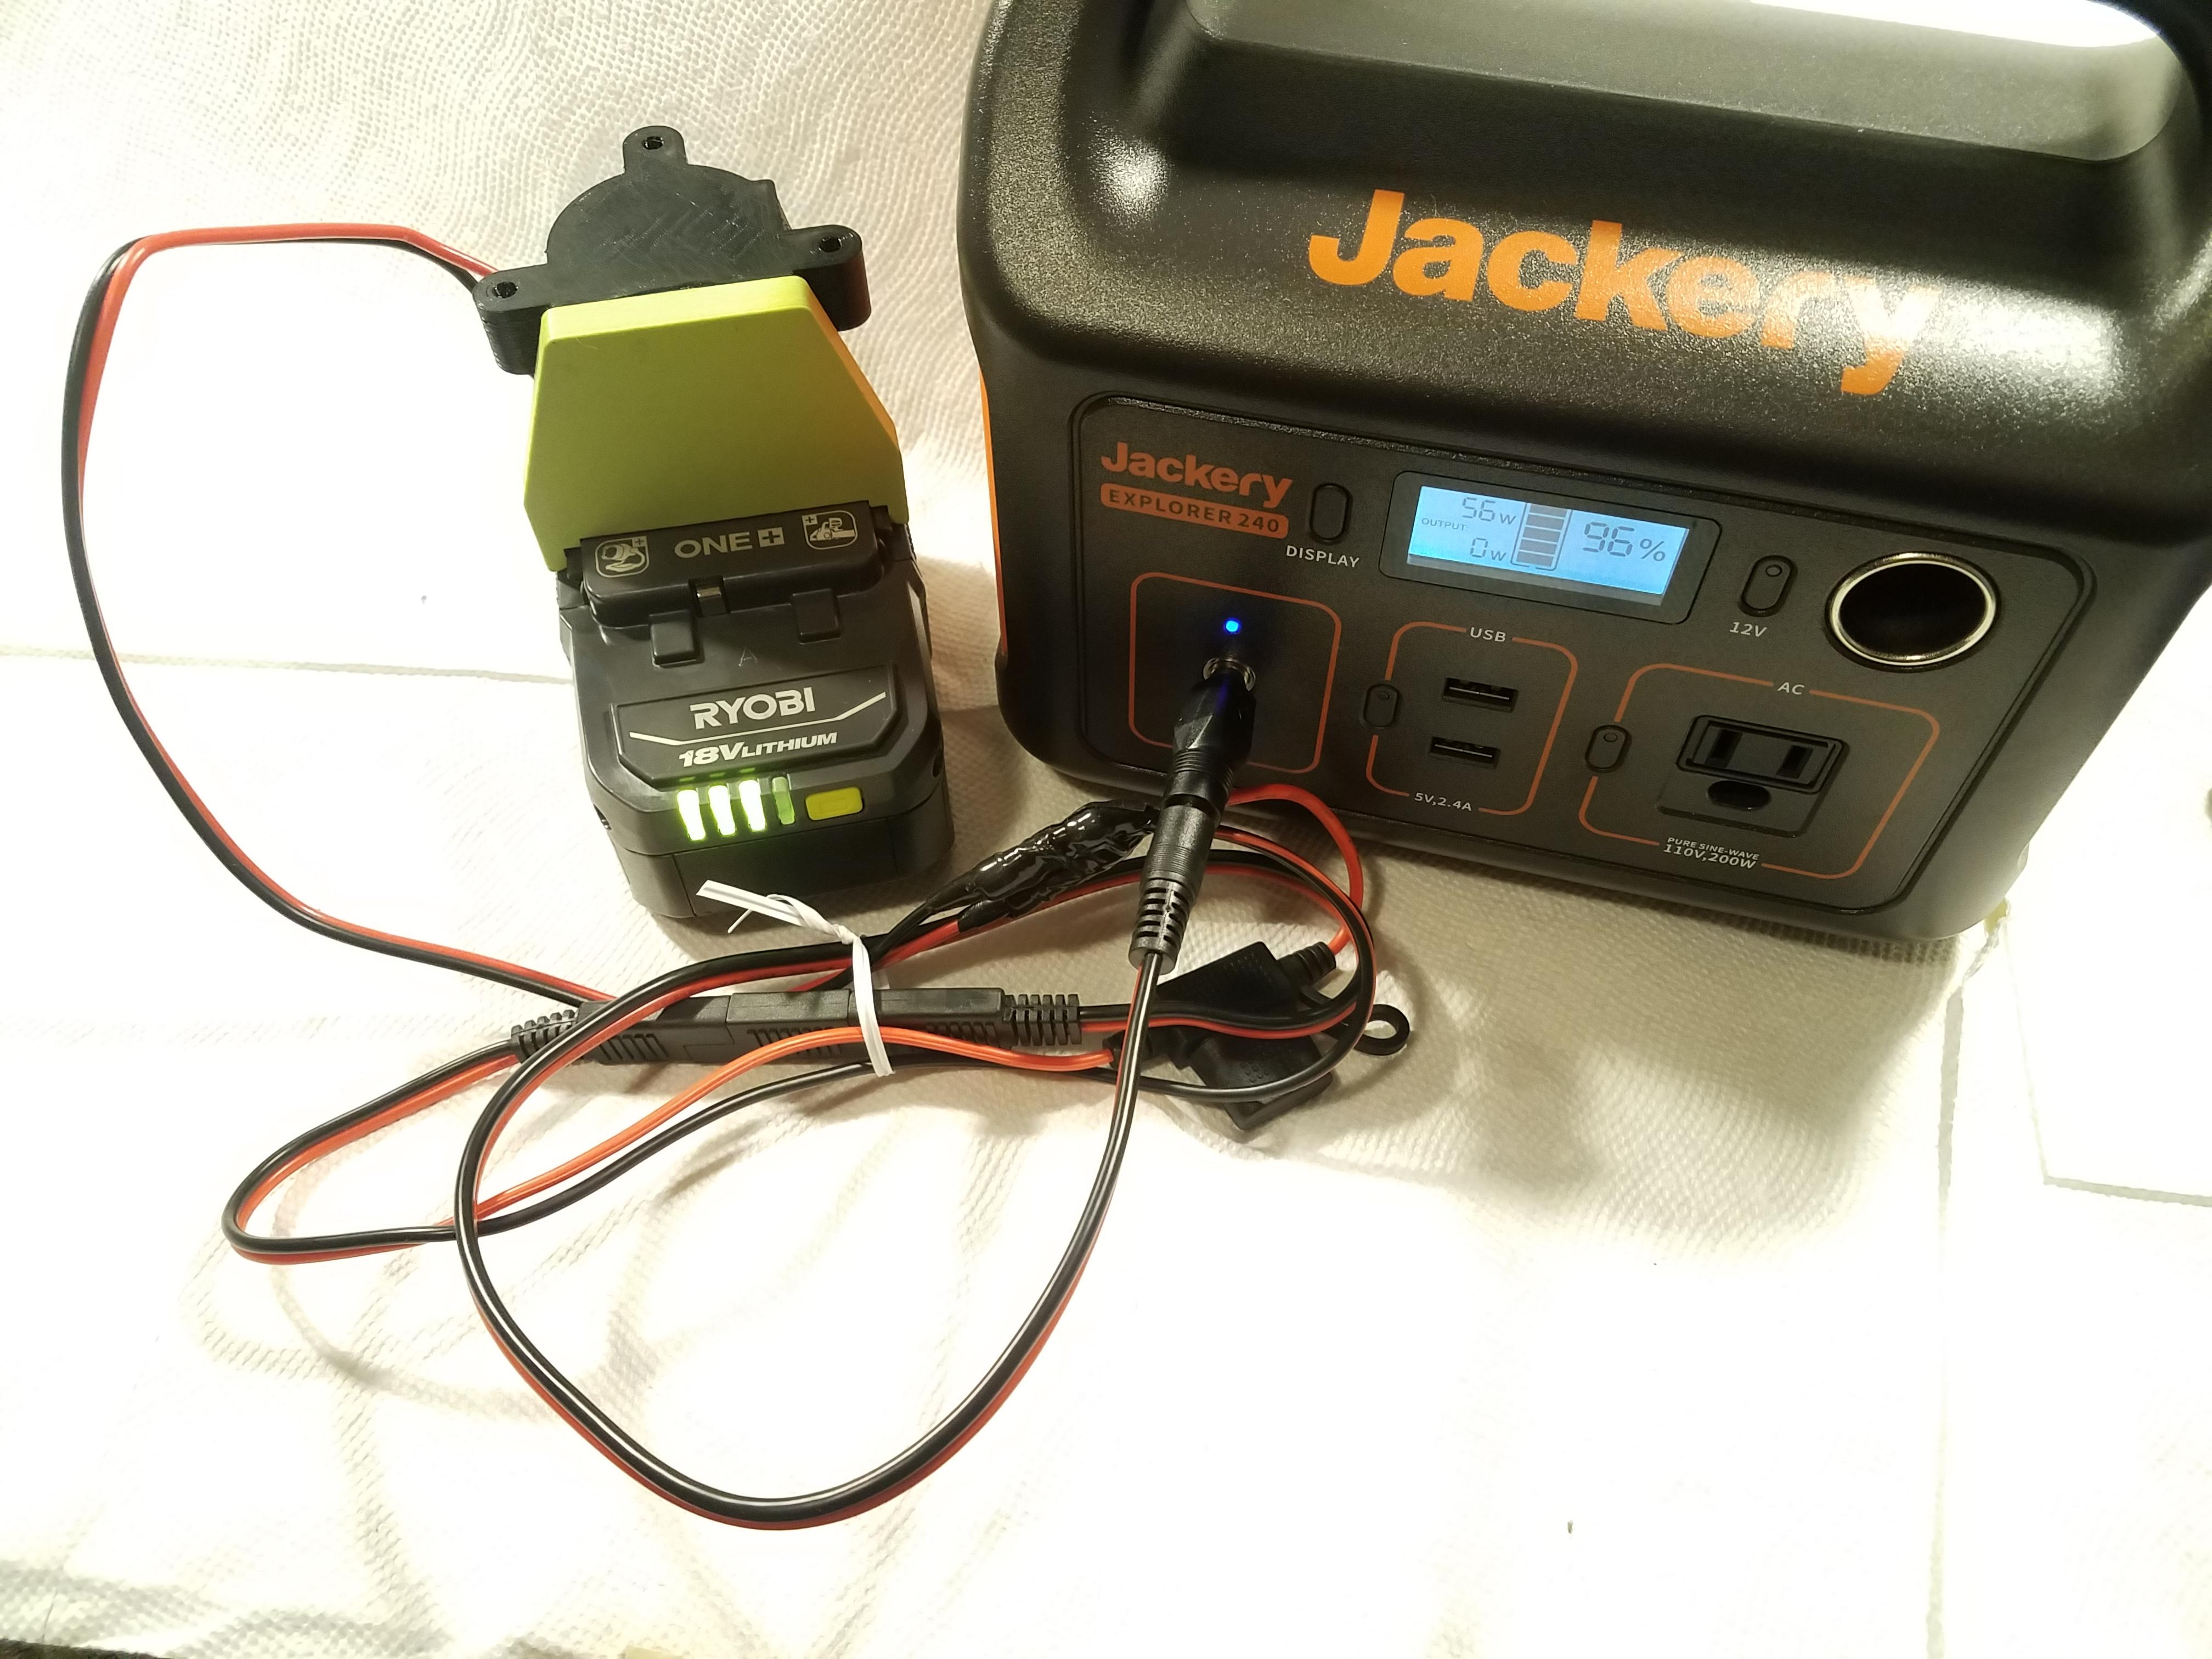 Expand Your Jackery Runtime Using Ryobi 18v One+ Batteries! No Soldering Needed. Endlessly Expand Your Jackery Capacity for Camping, RVing, & More!